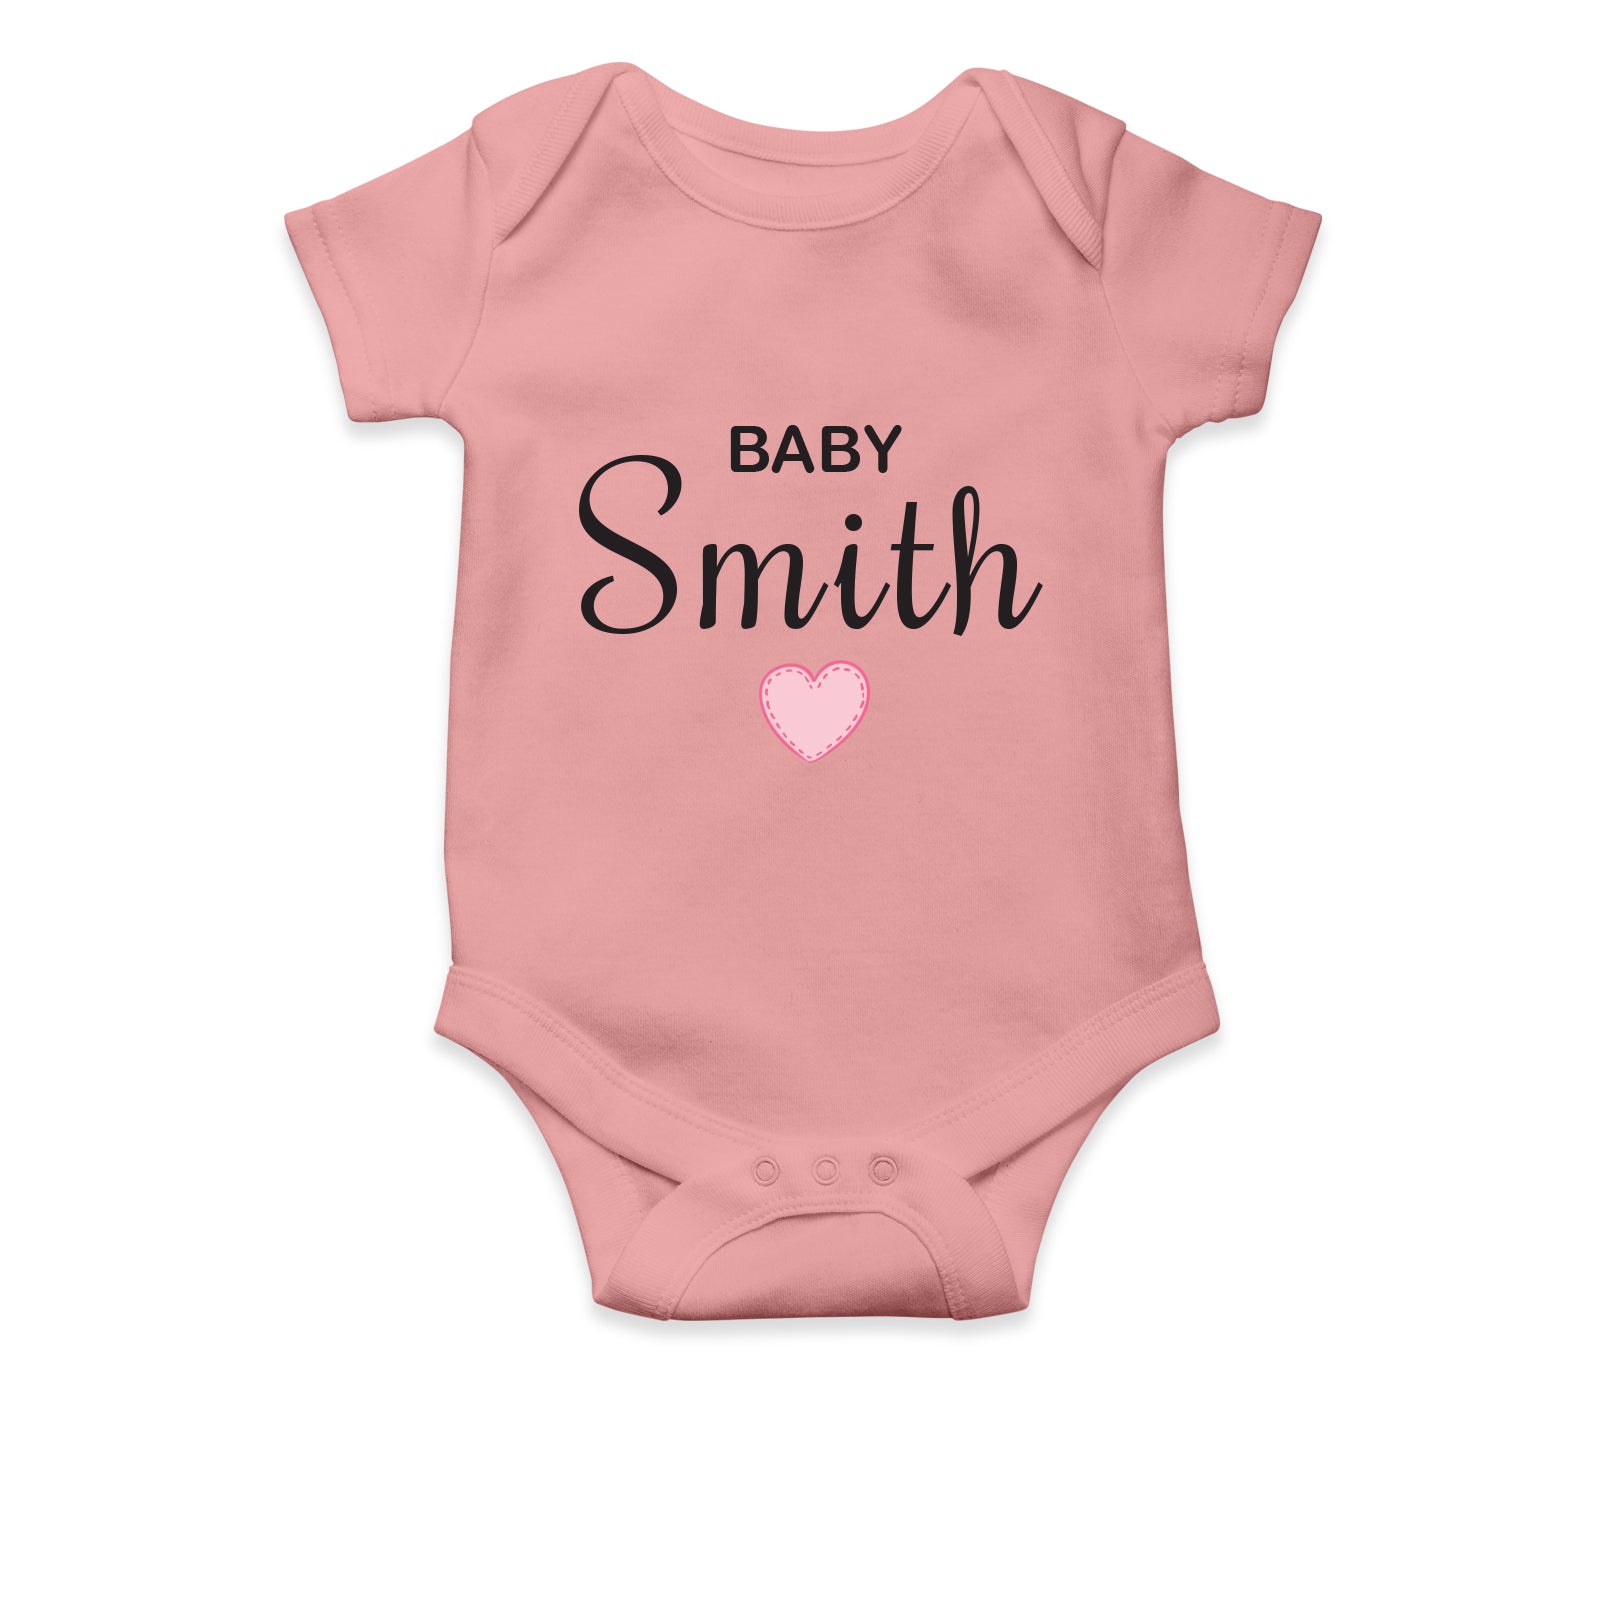 Personalised White Baby Body Suit Grow Vest - Pink Heart